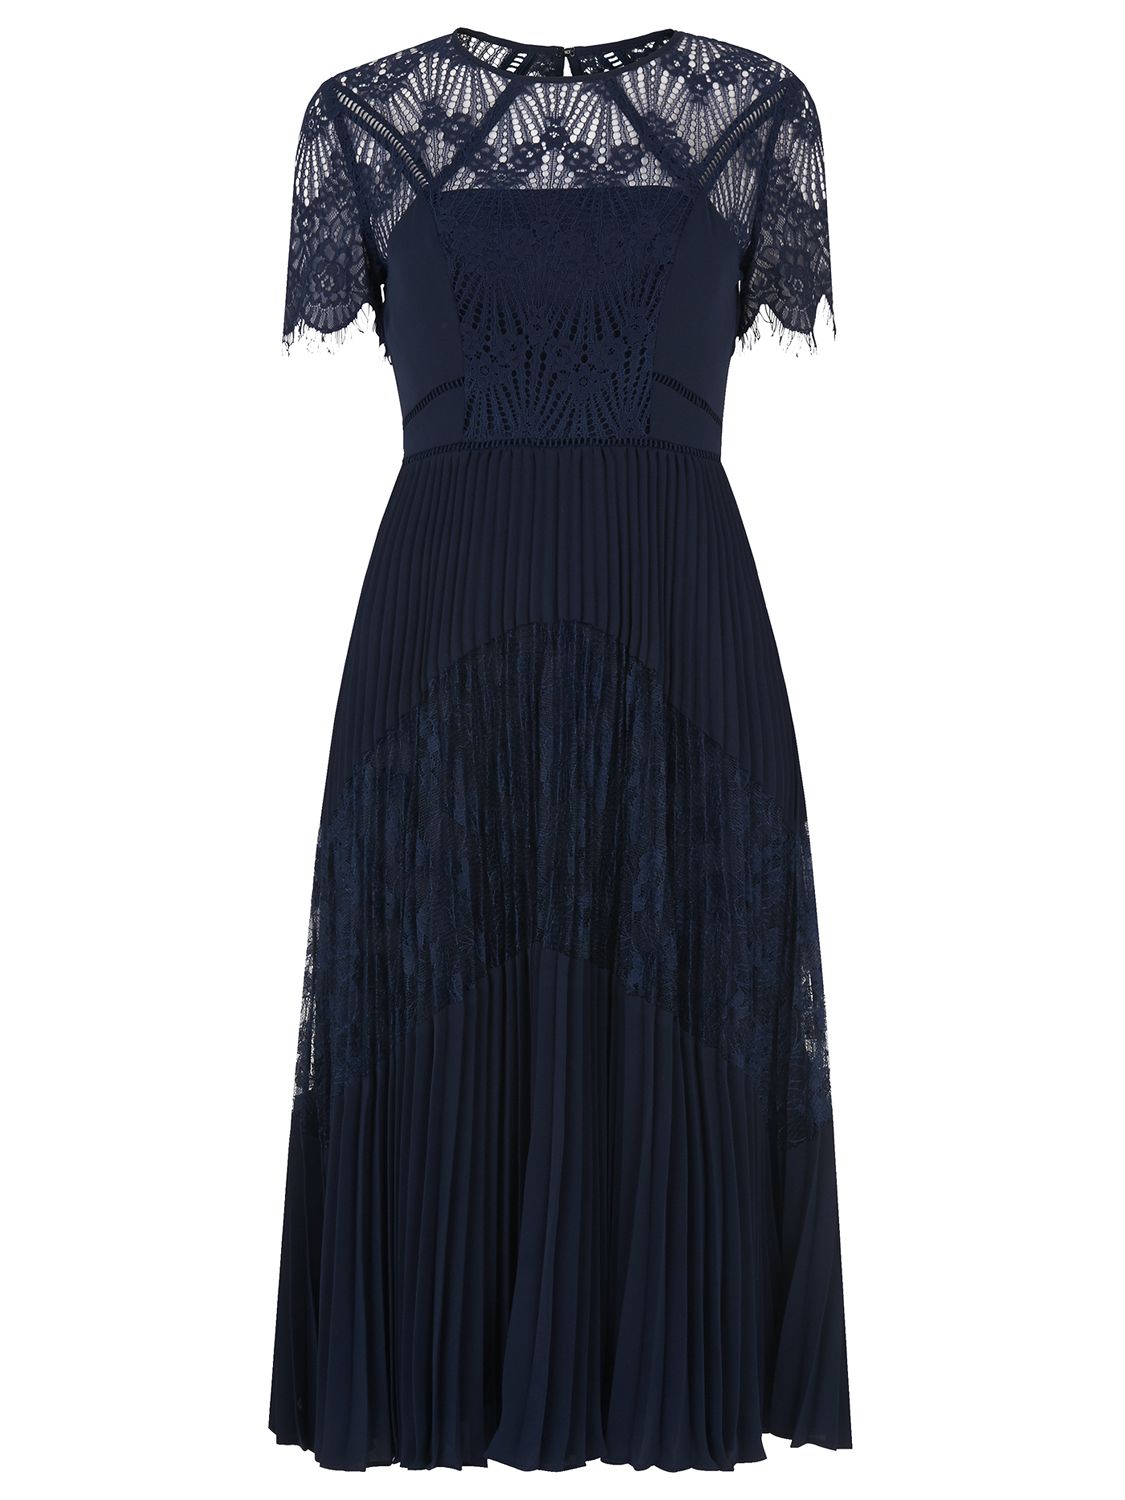 Whistles Lace Pleated Dress, Navy